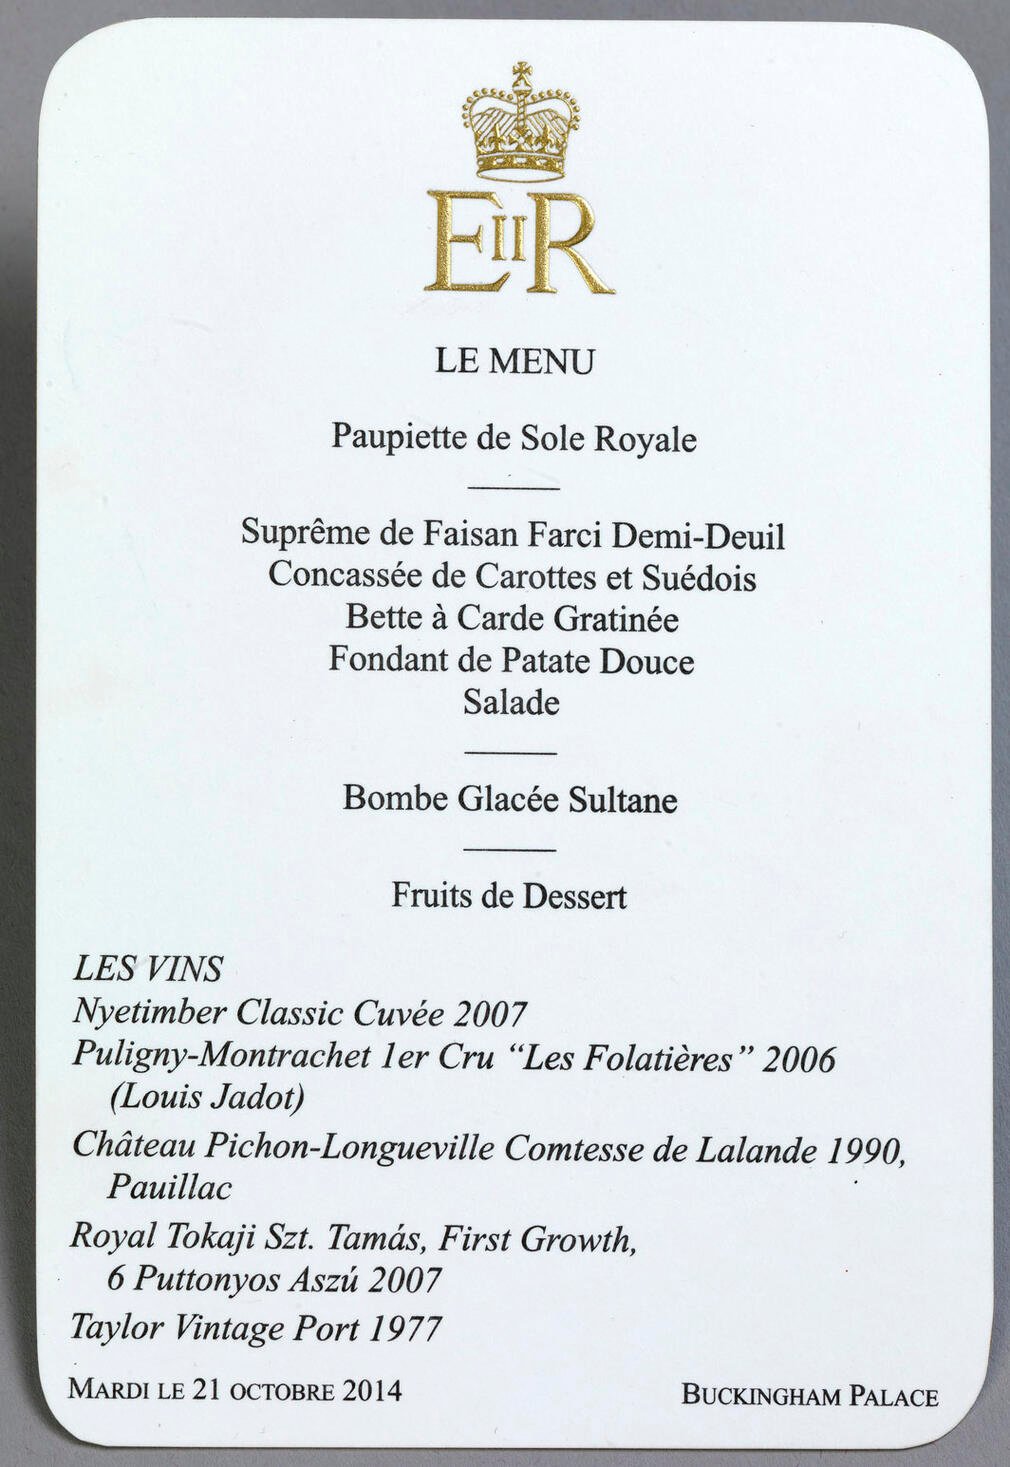 A menu from the Singapore State Banquet in 2014.